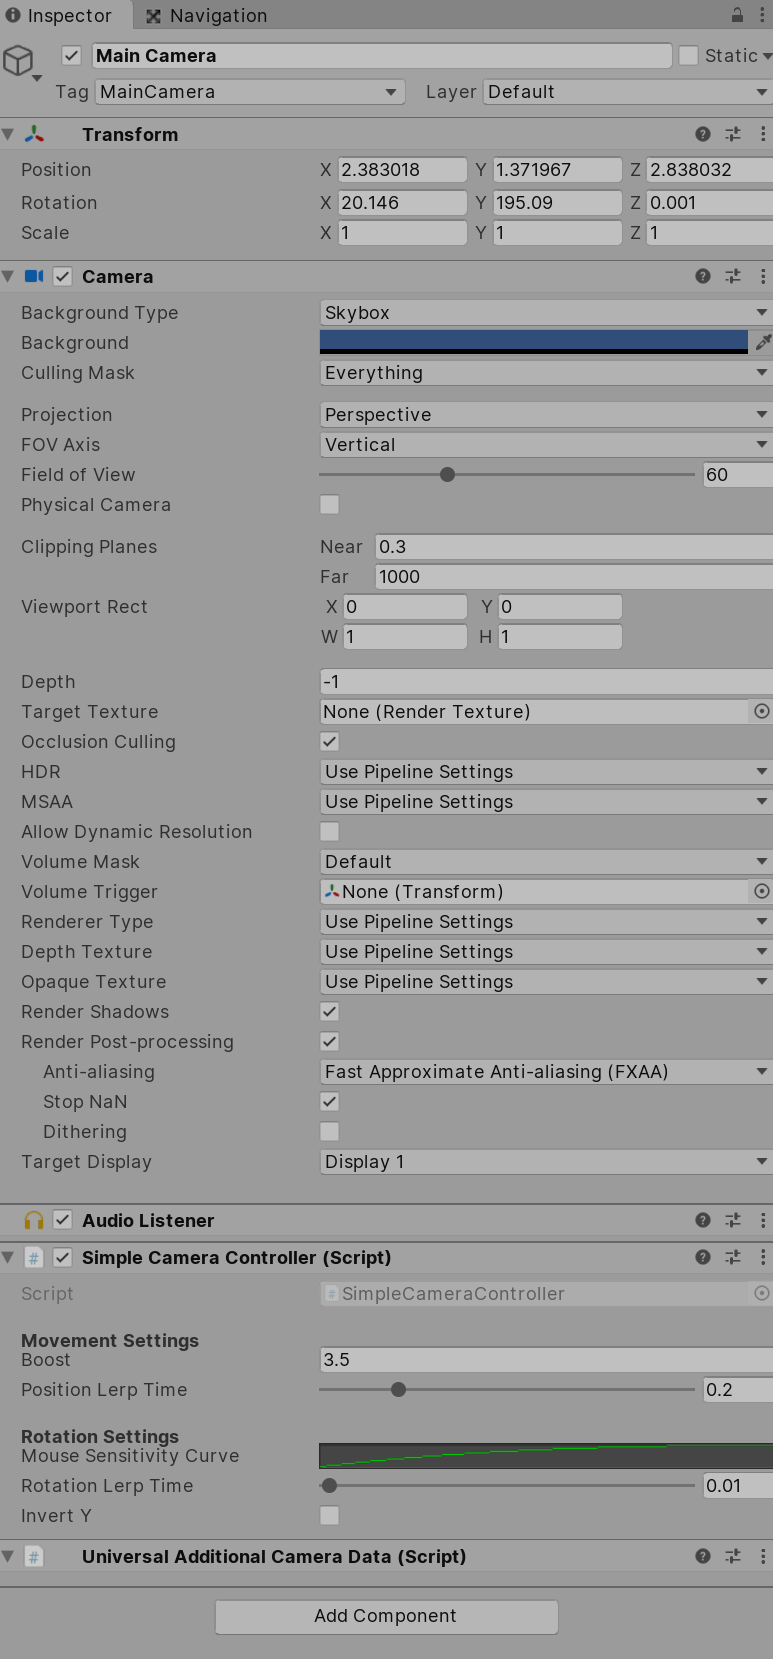 Hide/Show gameobject/collection checkbox in properties - Feature requests -  Defold game engine forum